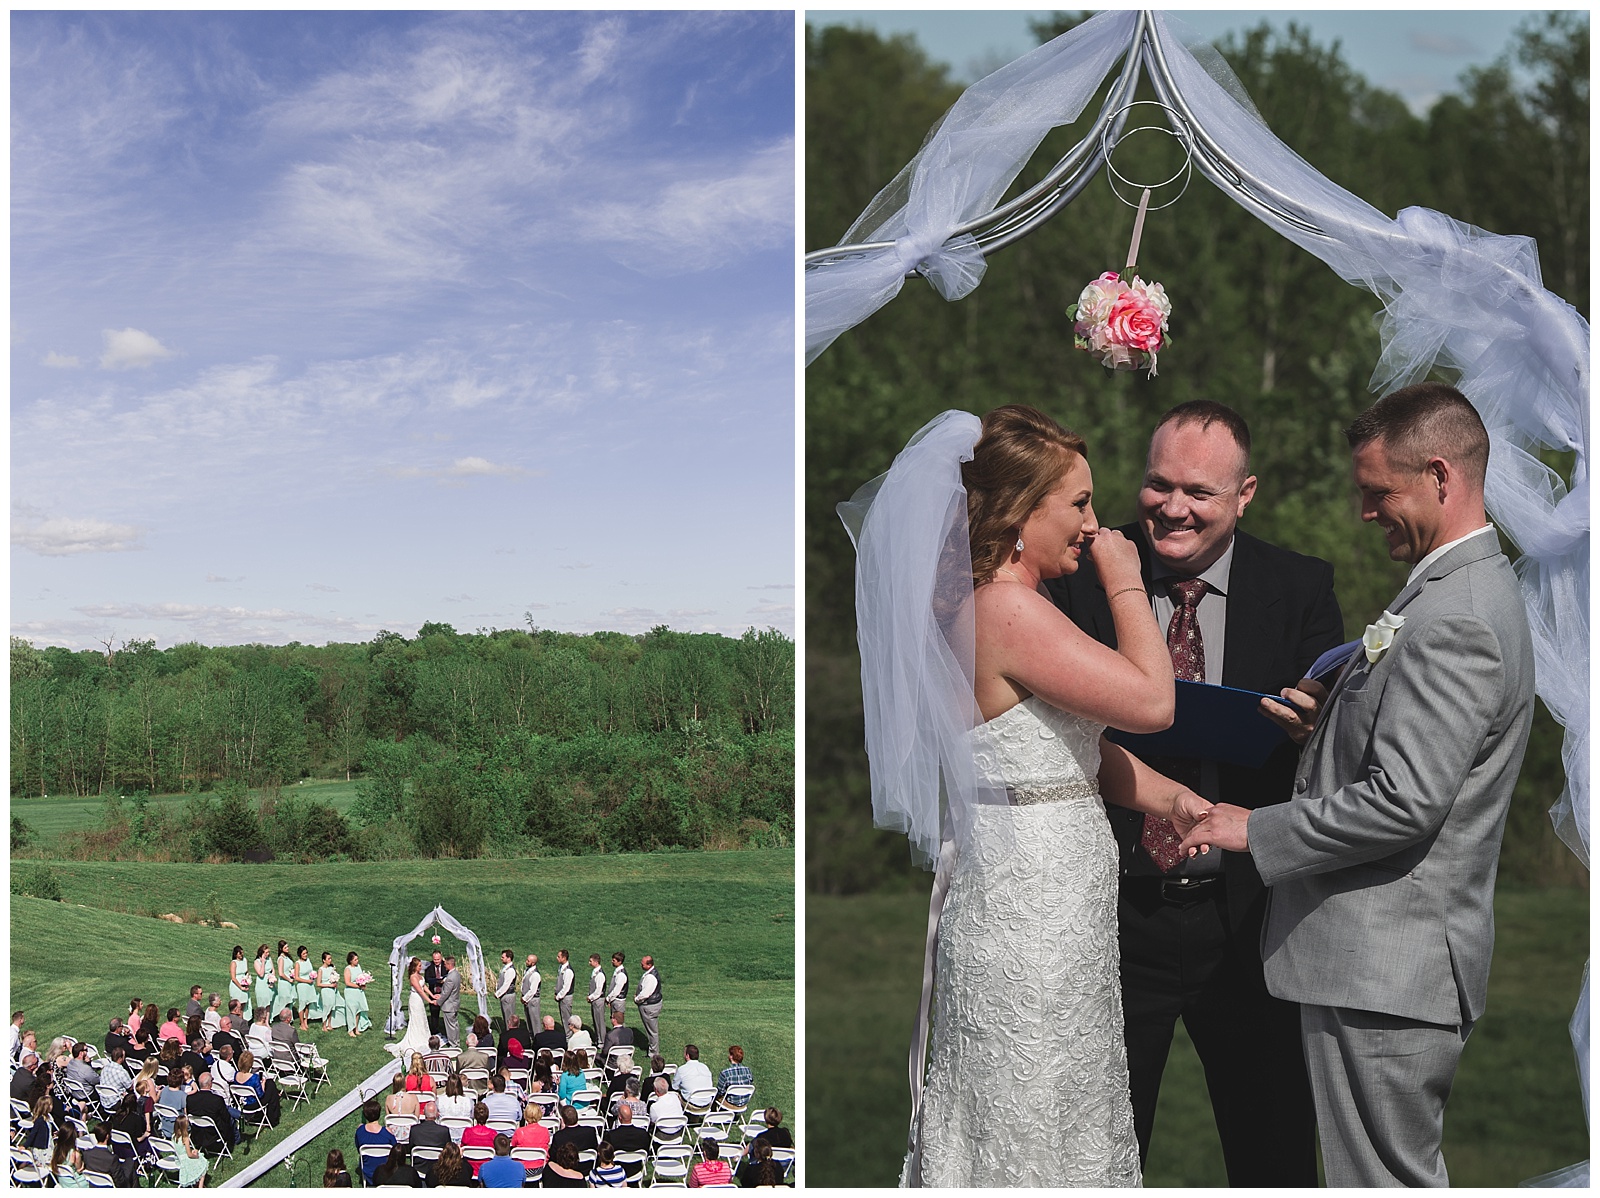 Wedding photography at The Elk's Lodge in Blue Springs, Missouri.